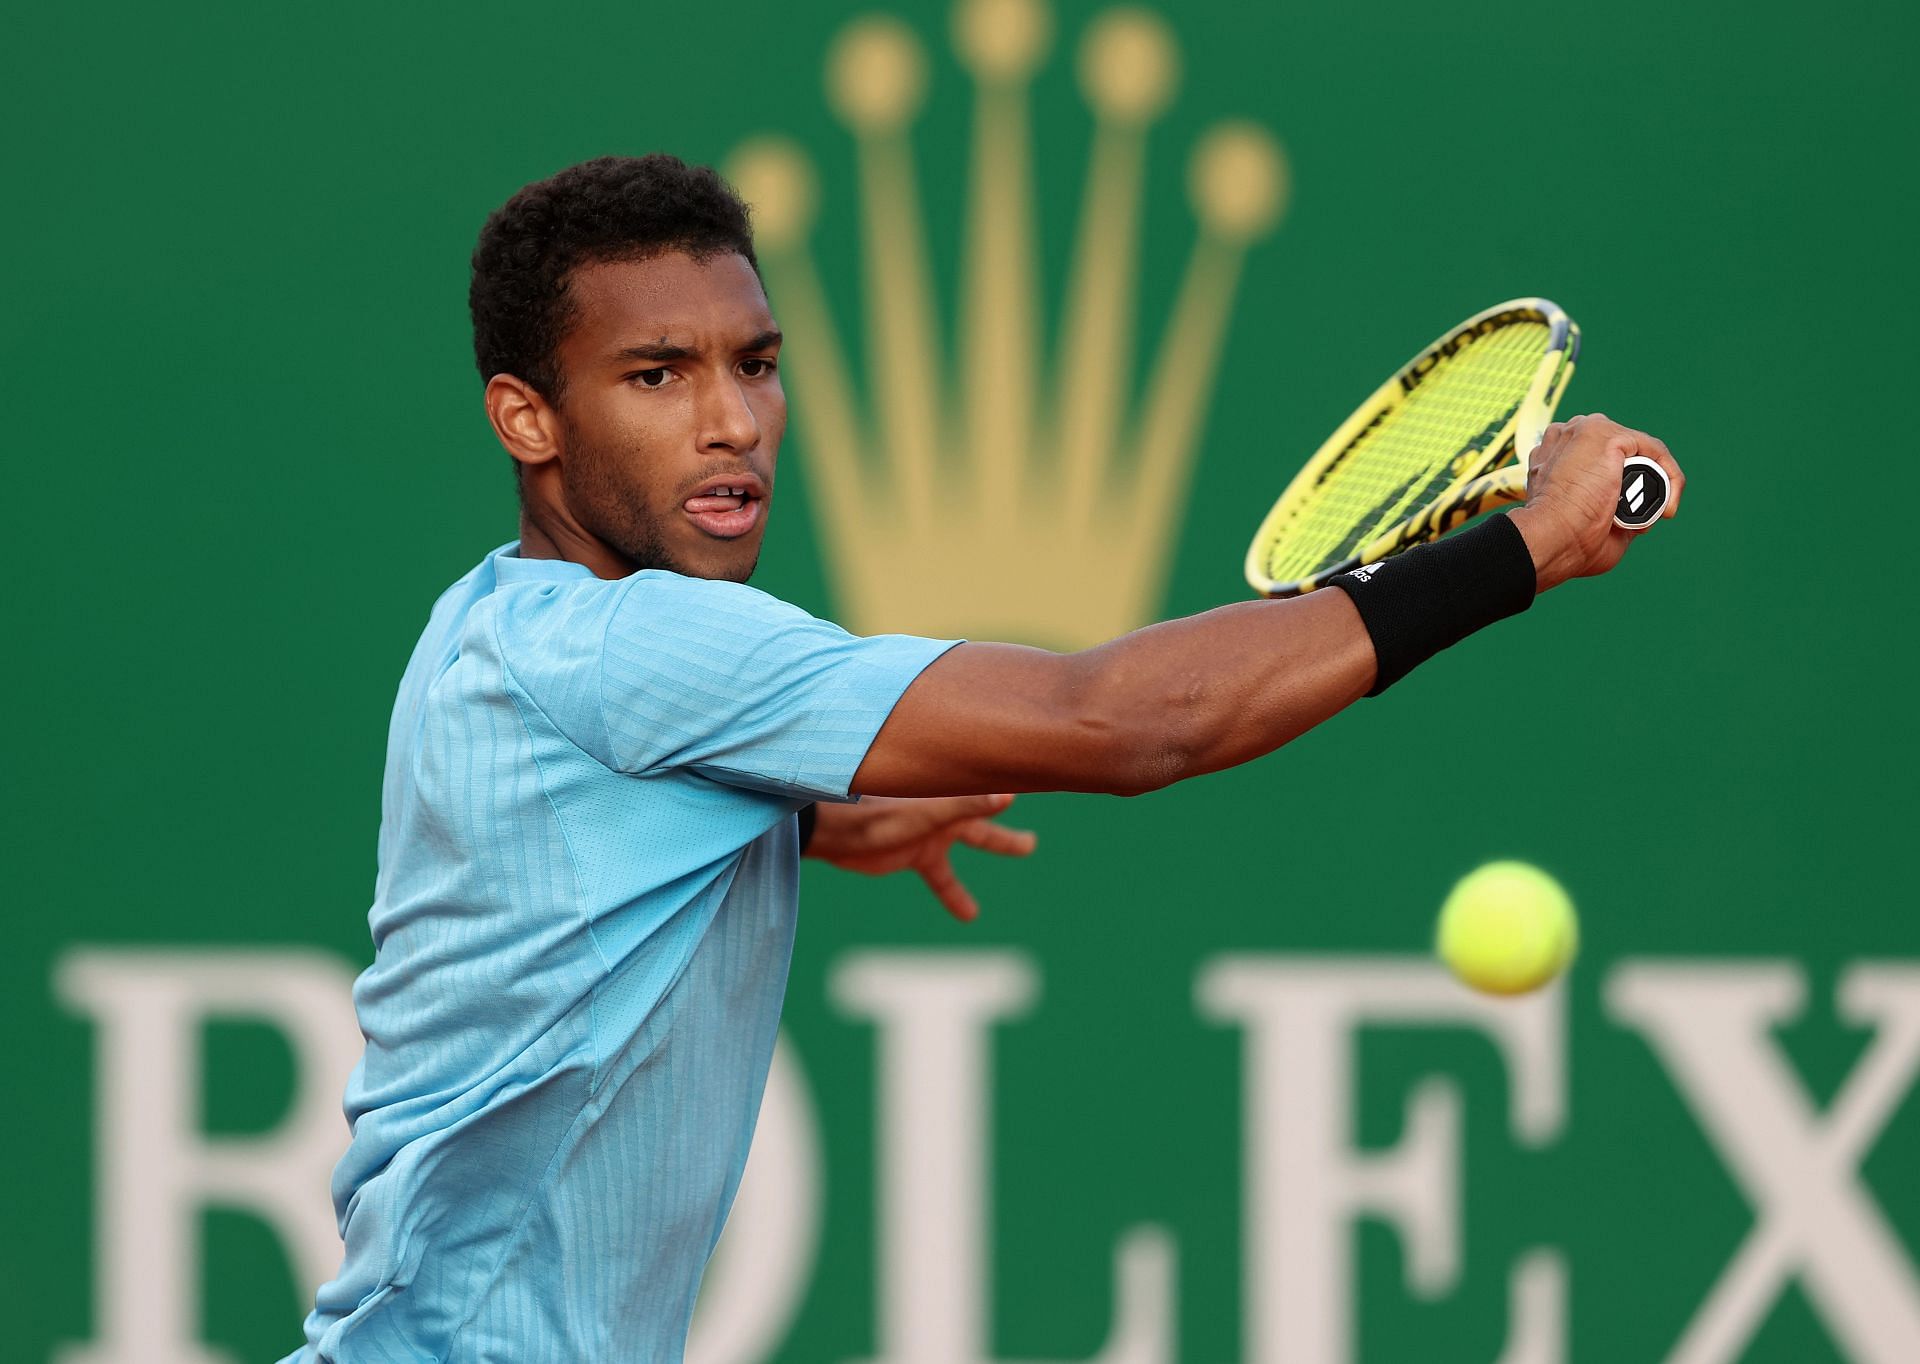 Auger-Aliassime at the 2022 Rolex Monte-Carlo Masters.